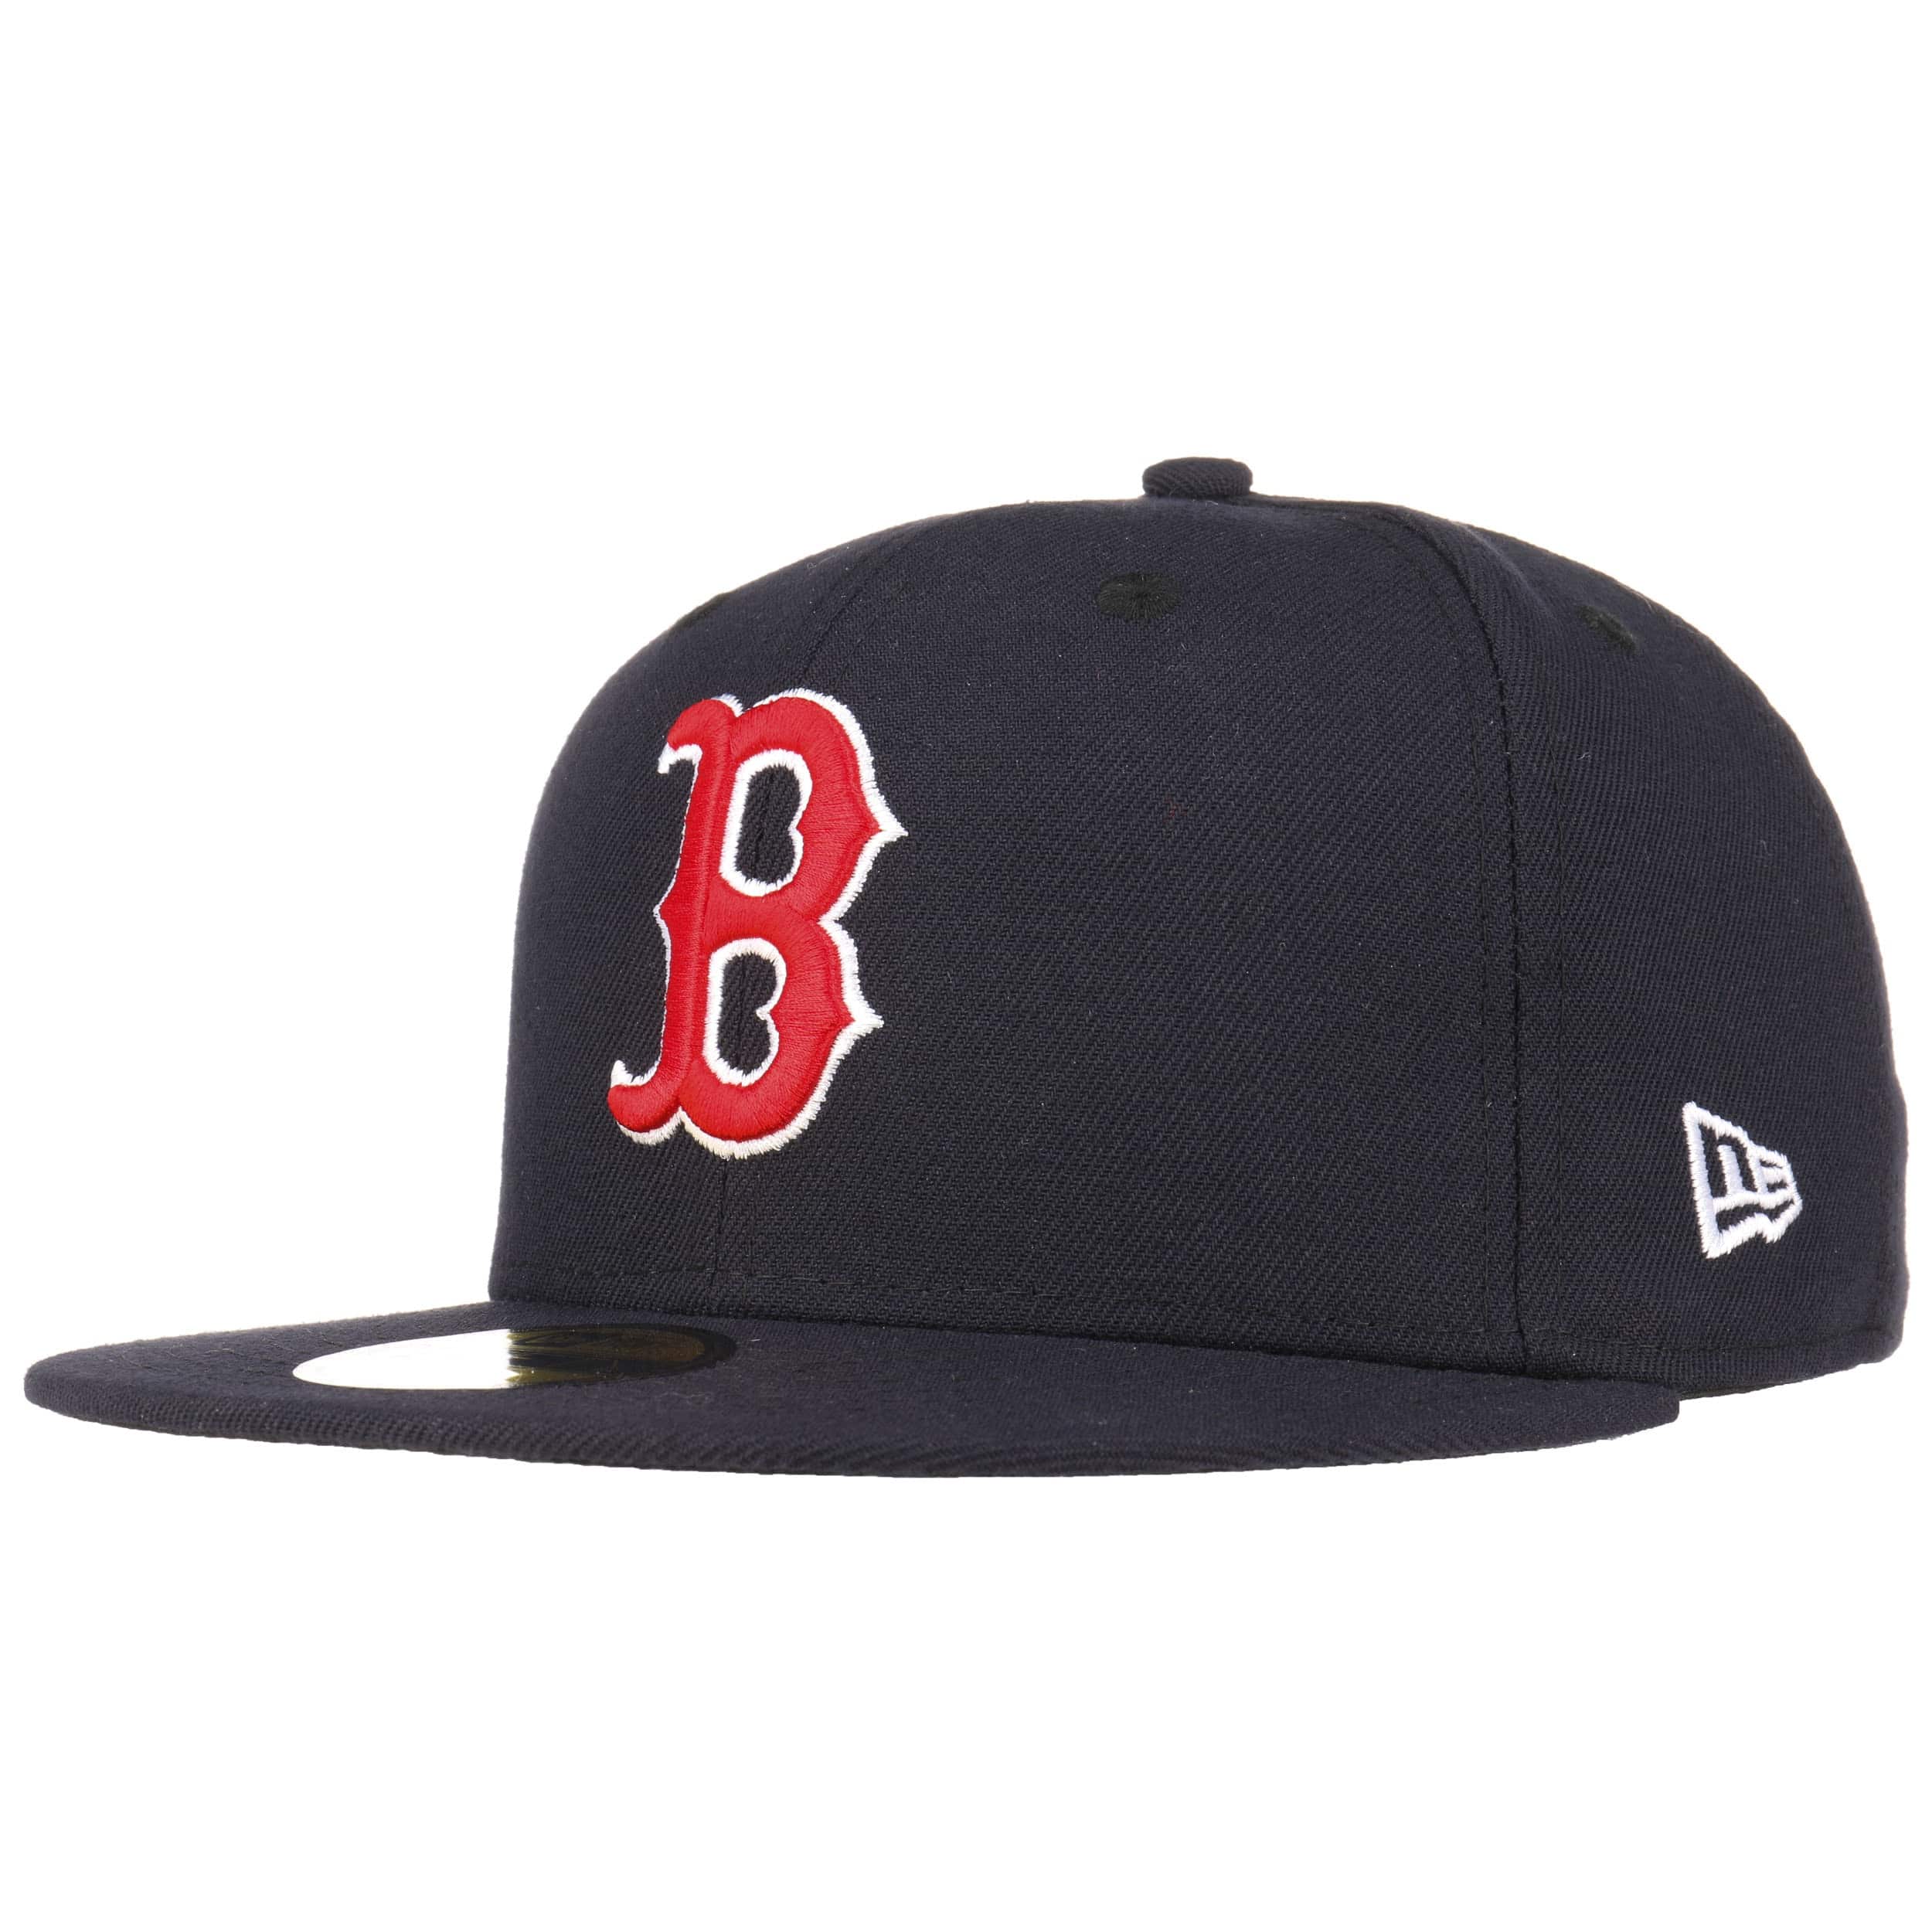 59Fifty TSF Boston Red Sox Cap by New Era, EUR 34,95 --> Hats, caps ...